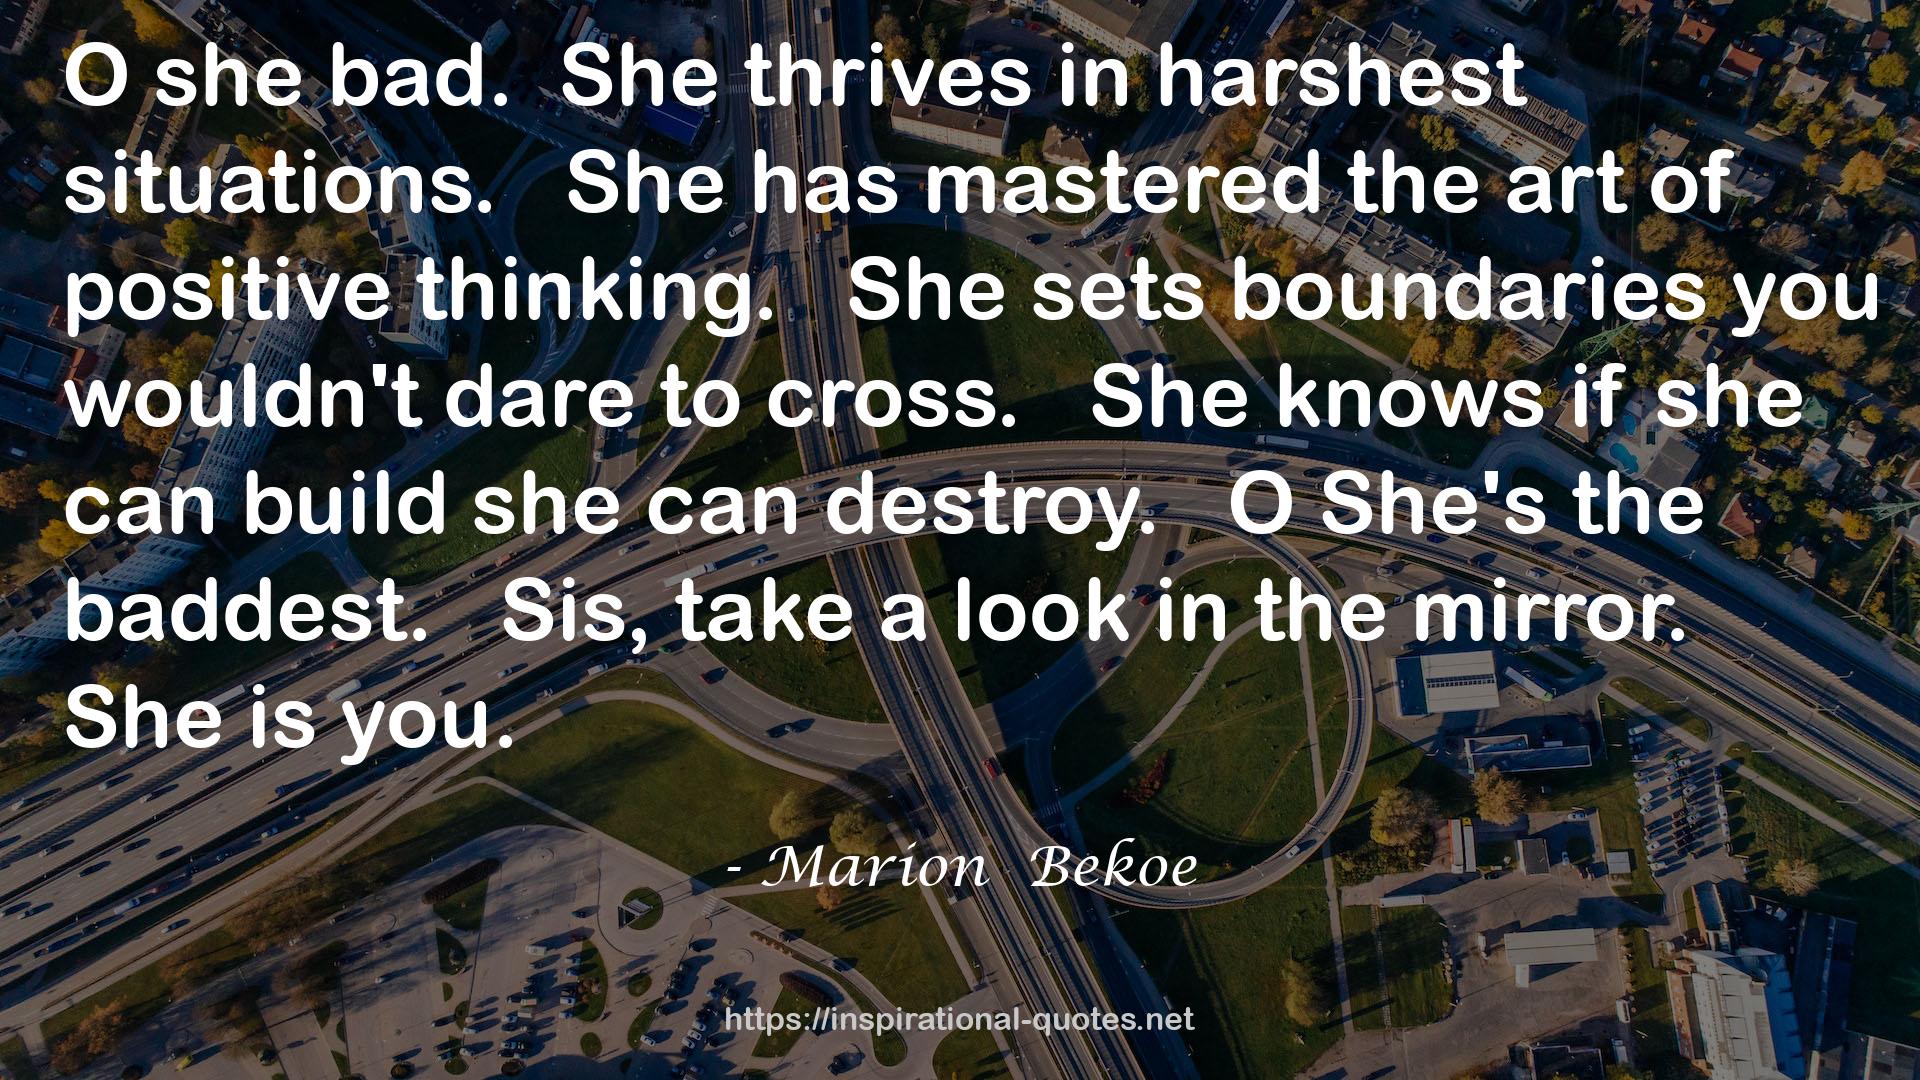 Marion  Bekoe QUOTES